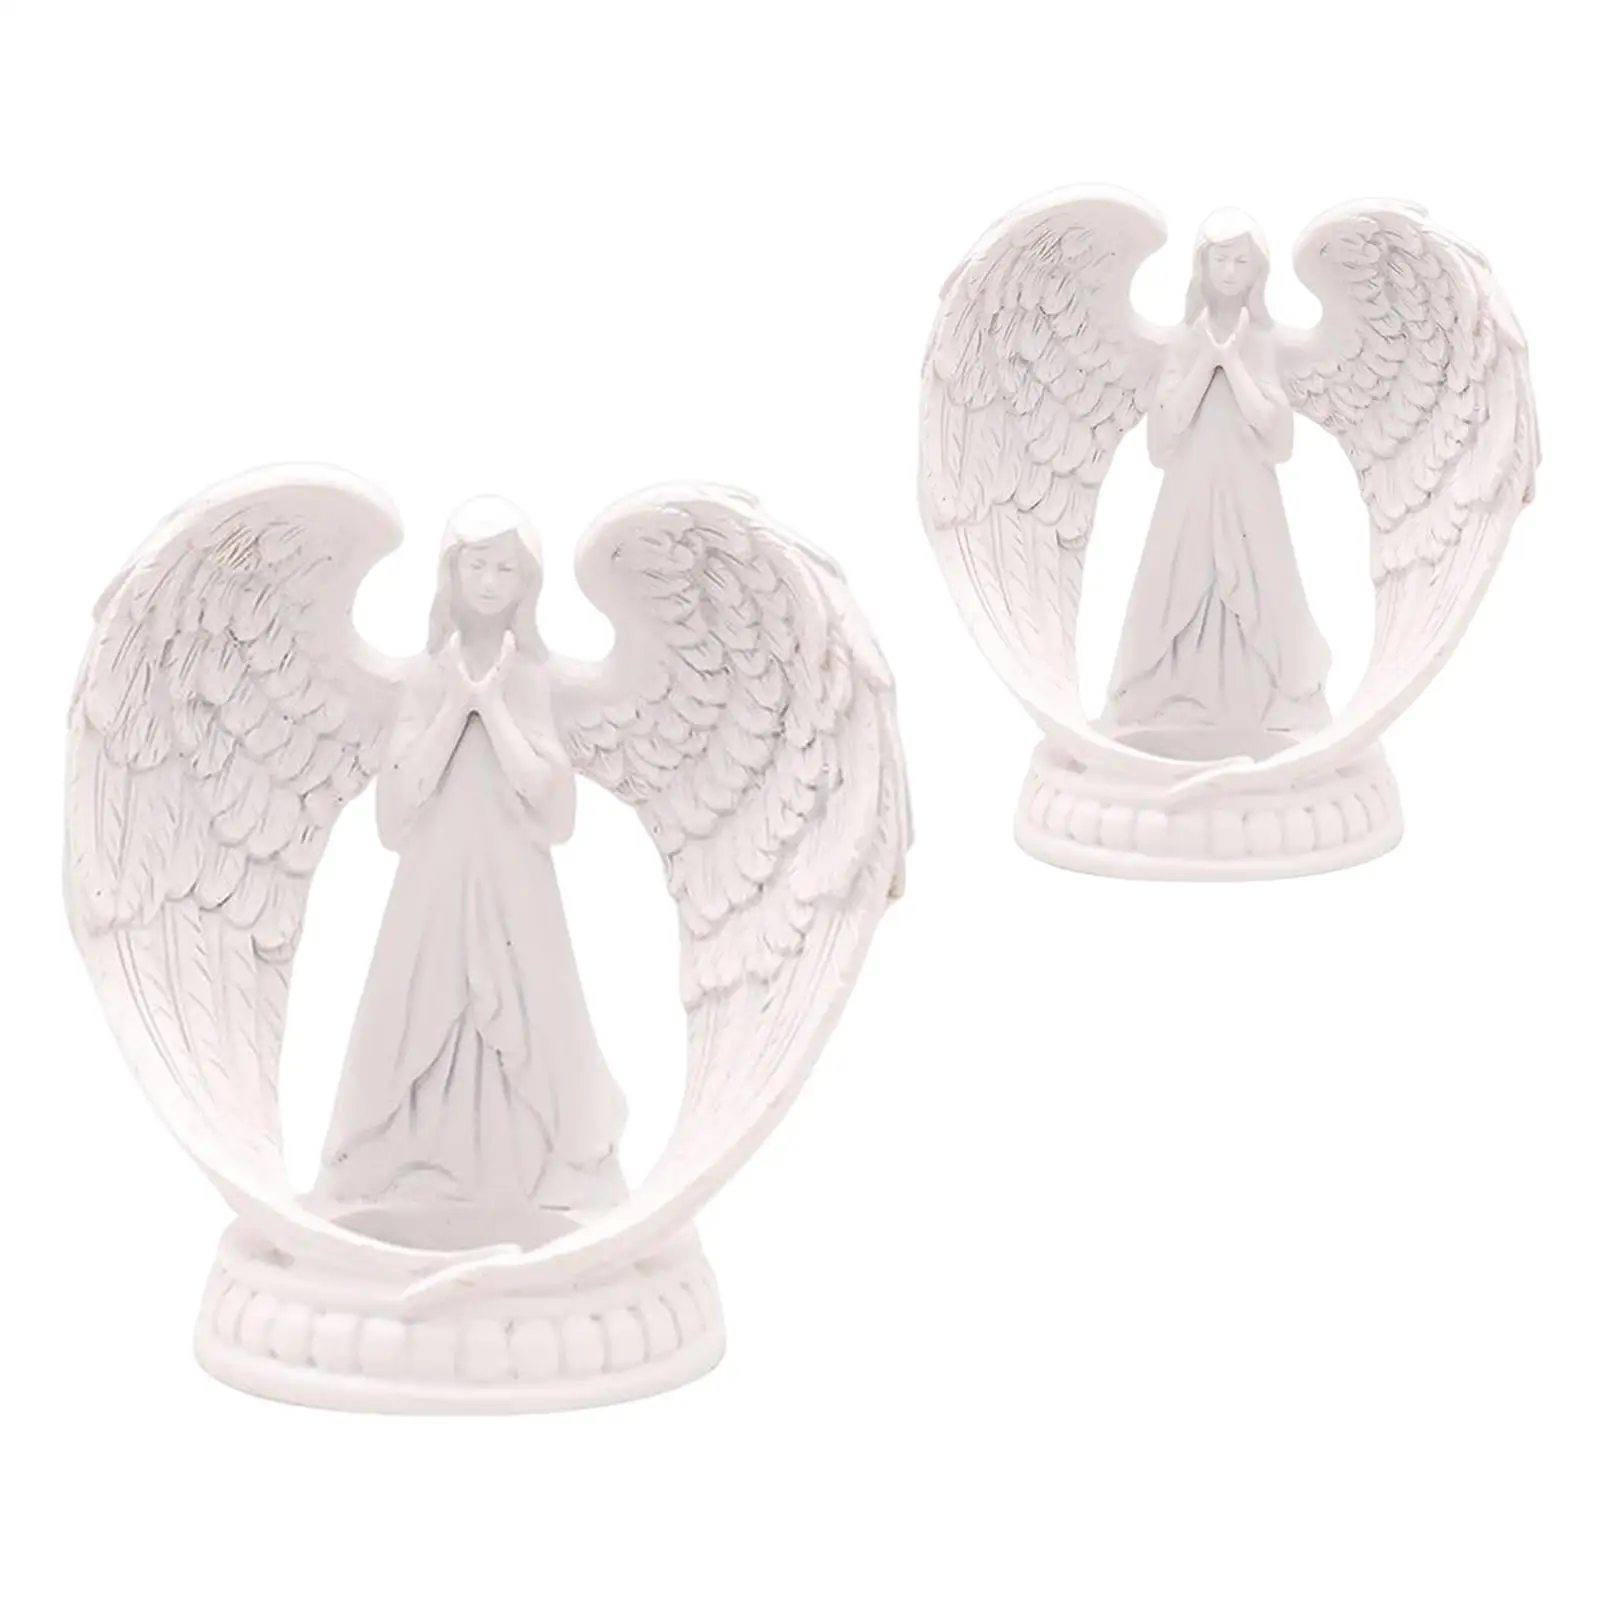 Candle Holder Votive Candle Holders Angel Figurine Table Centerpiece for Anniversary Birthday Party Decoration